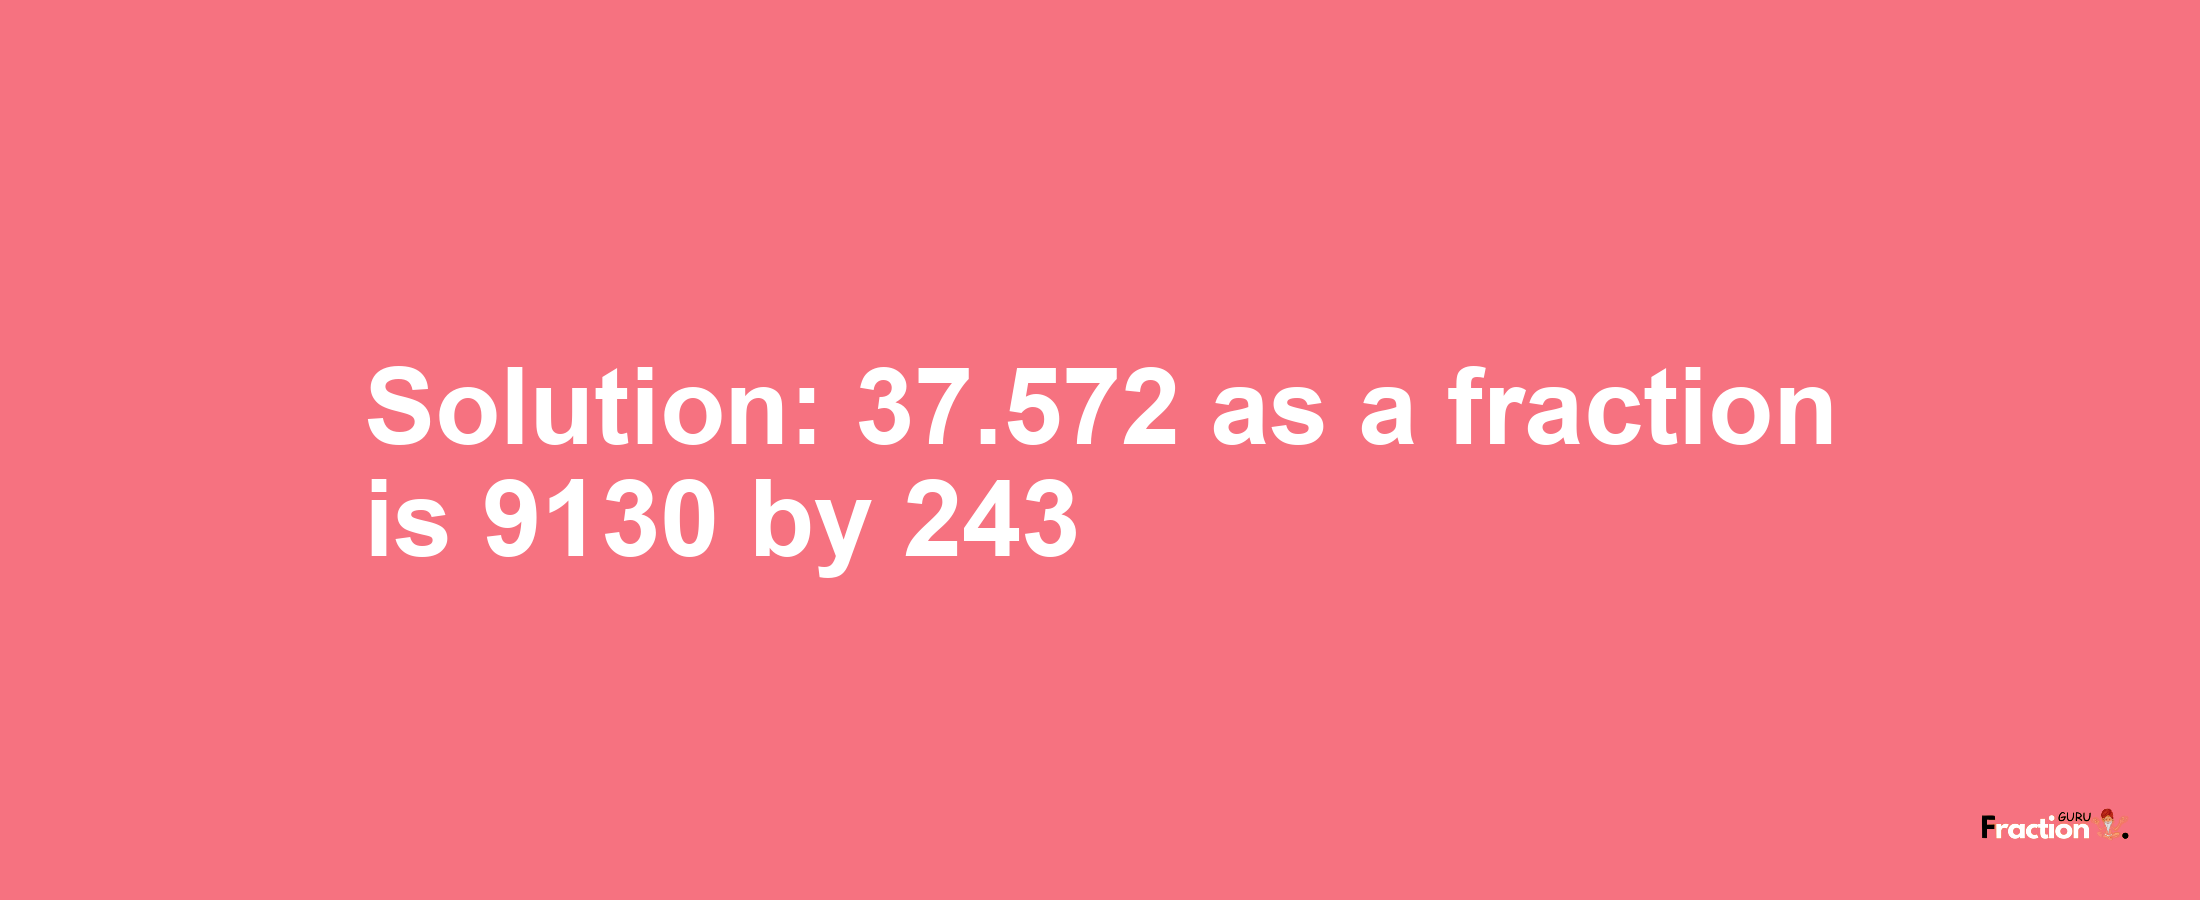 Solution:37.572 as a fraction is 9130/243